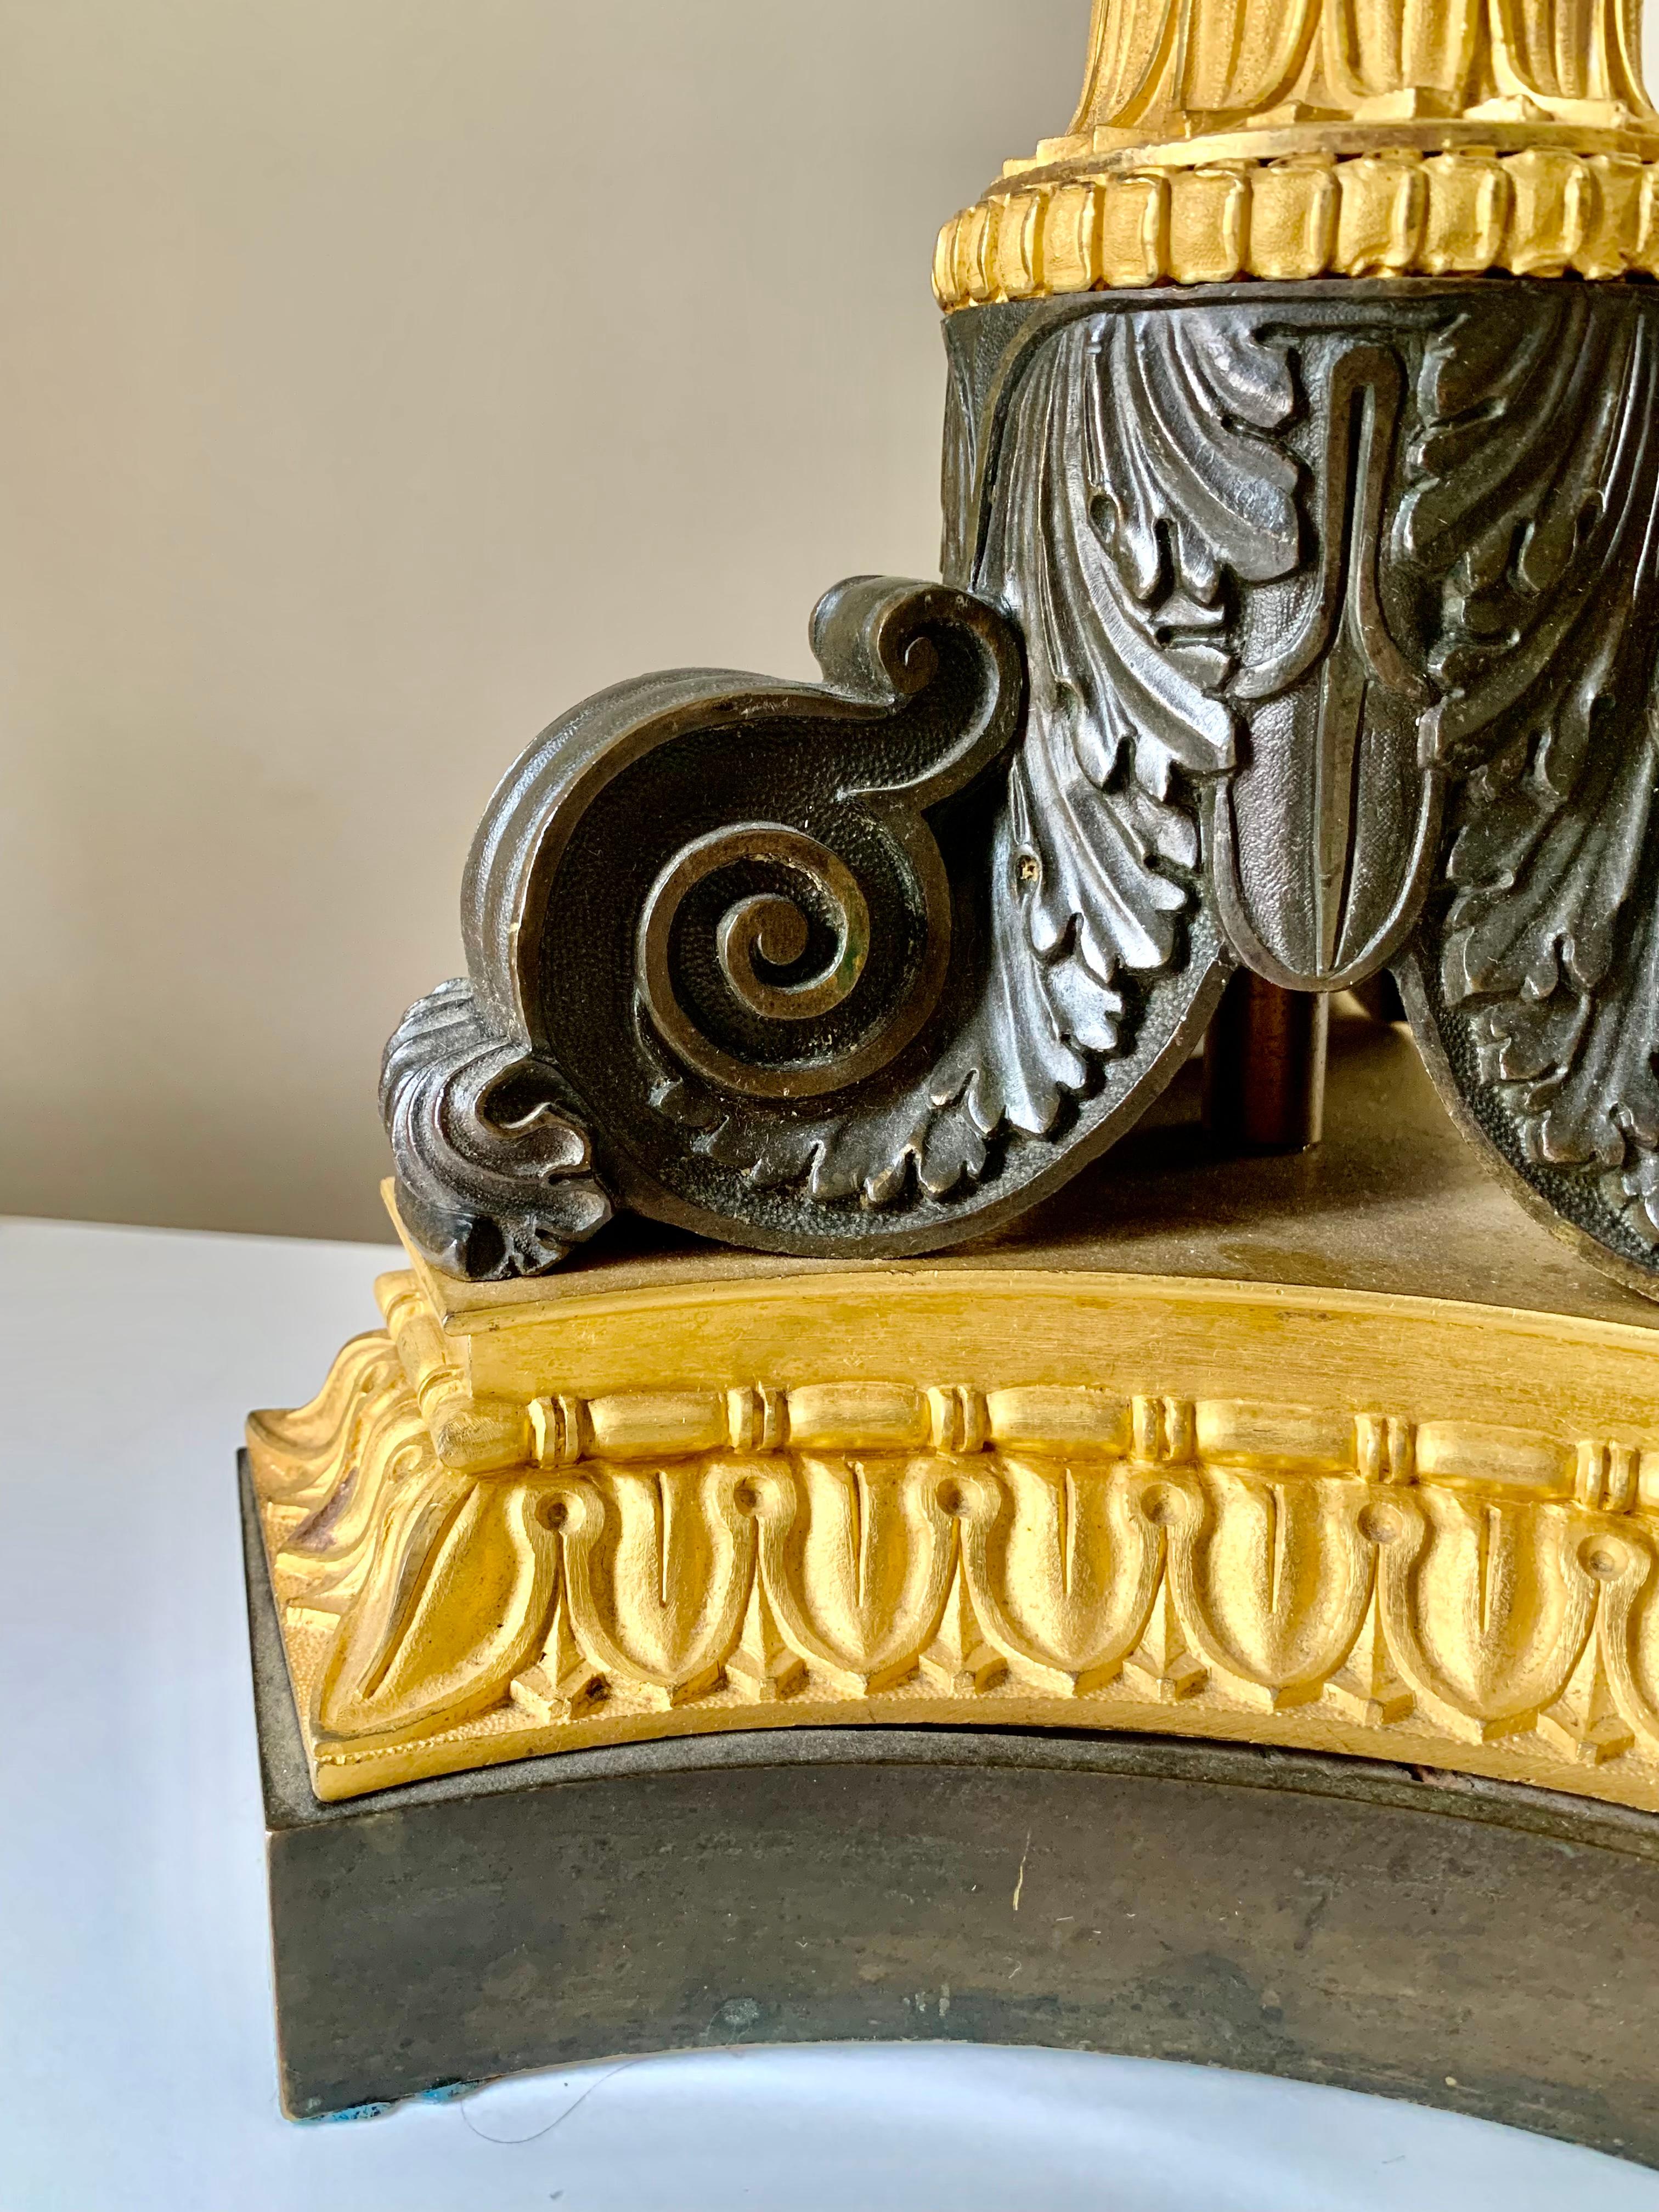 Substantial, fabulous quality Charles X period gilt and patinated bronze column lamps.
Original matte and burnished gilding in outstanding condition
Unusual lotus shaped gilded capitals above a circular tapering patinated bronze column with an